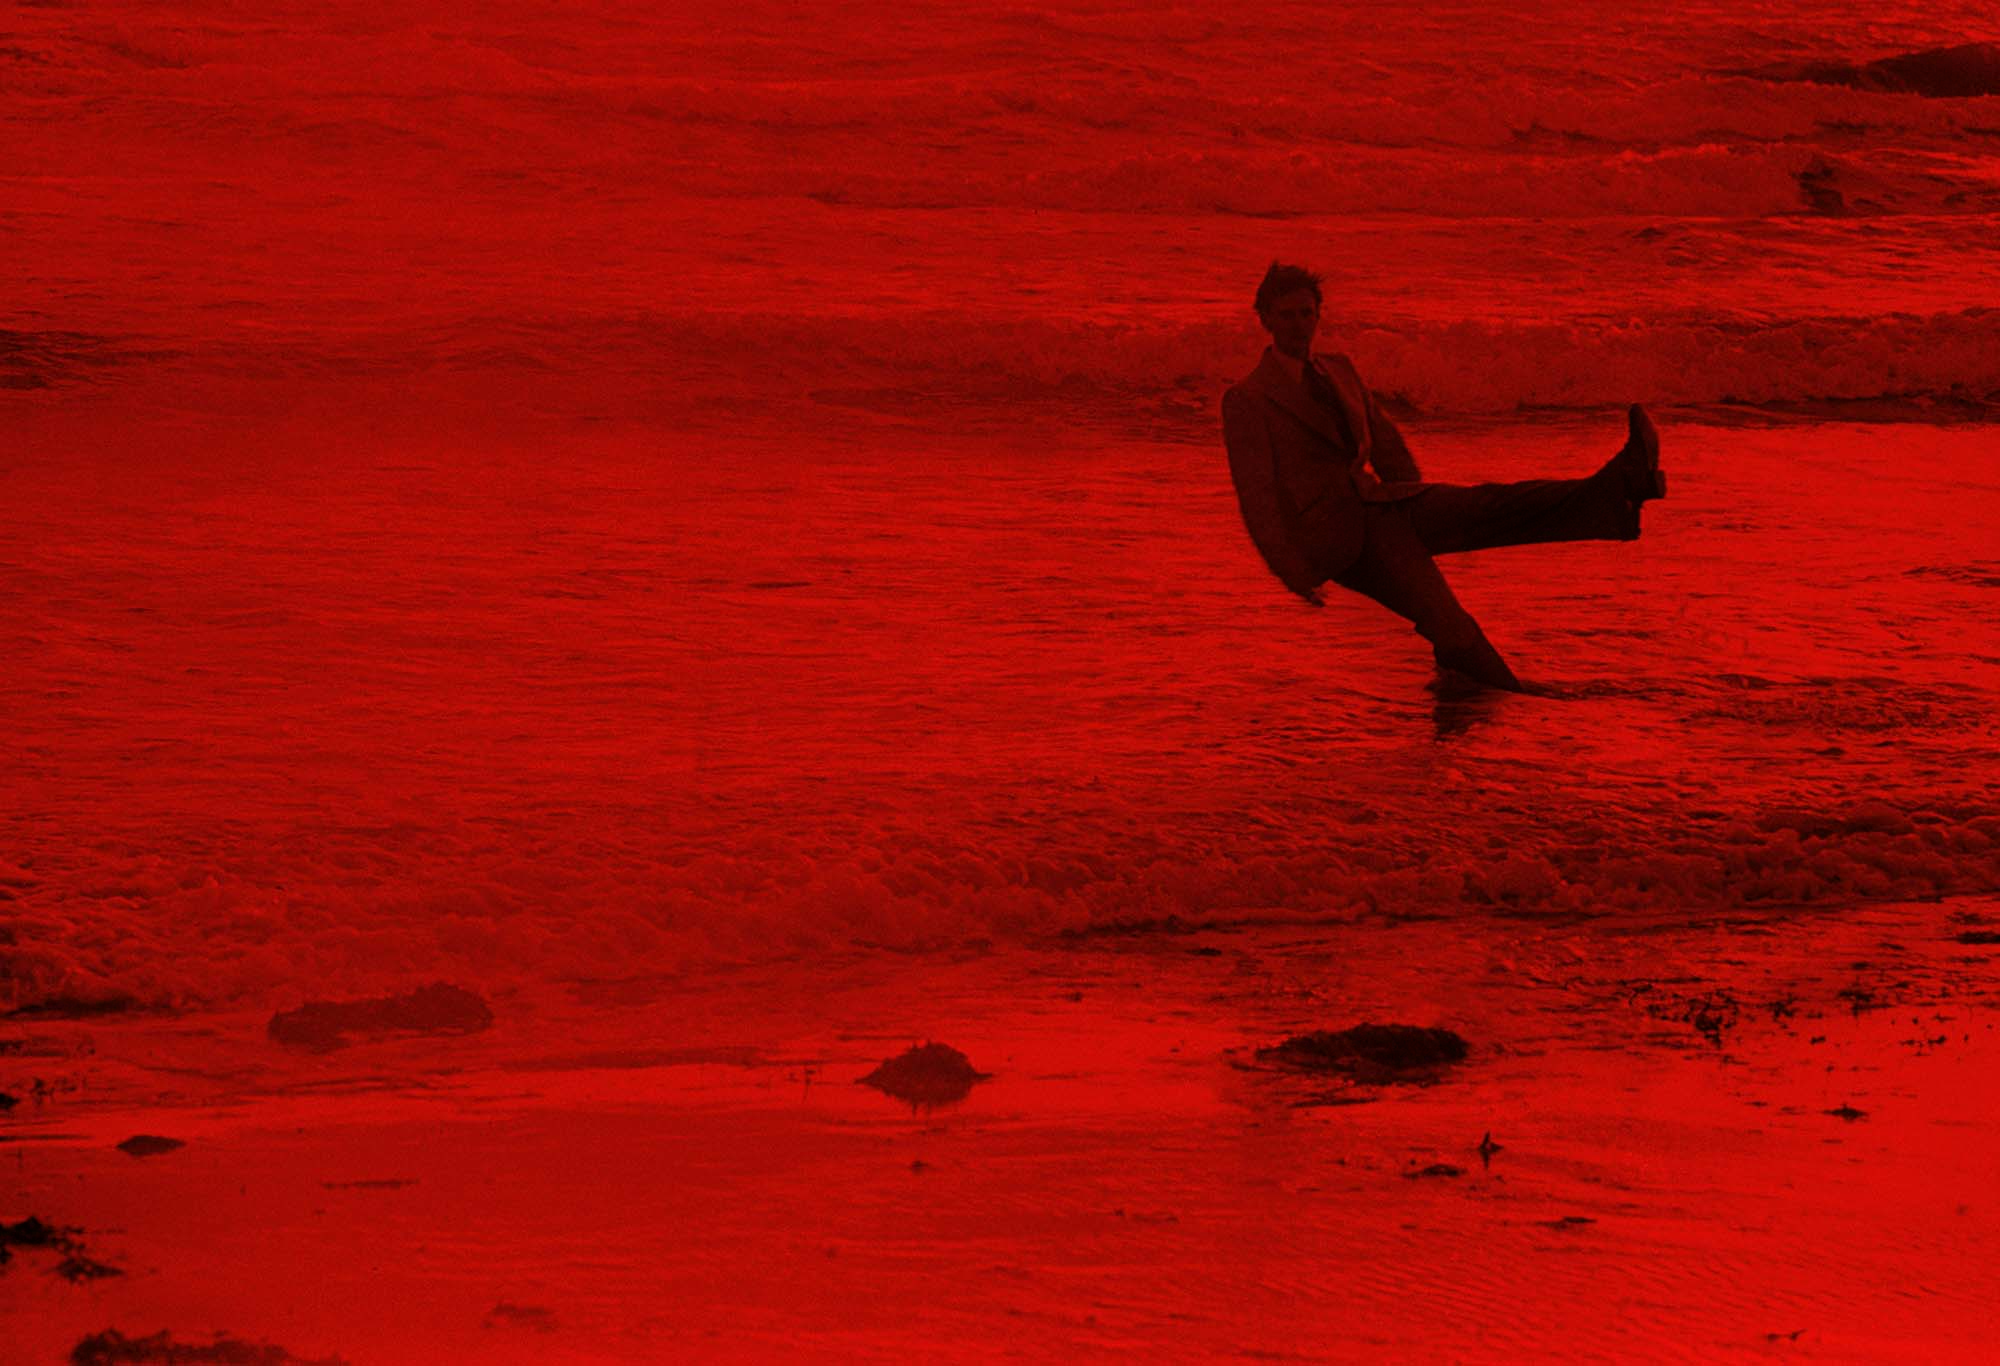 Derek Kreckler, Wet Dream (red), 1978. colour video, digitised from 35mm transparencies, looped. Courtesy of the artist.